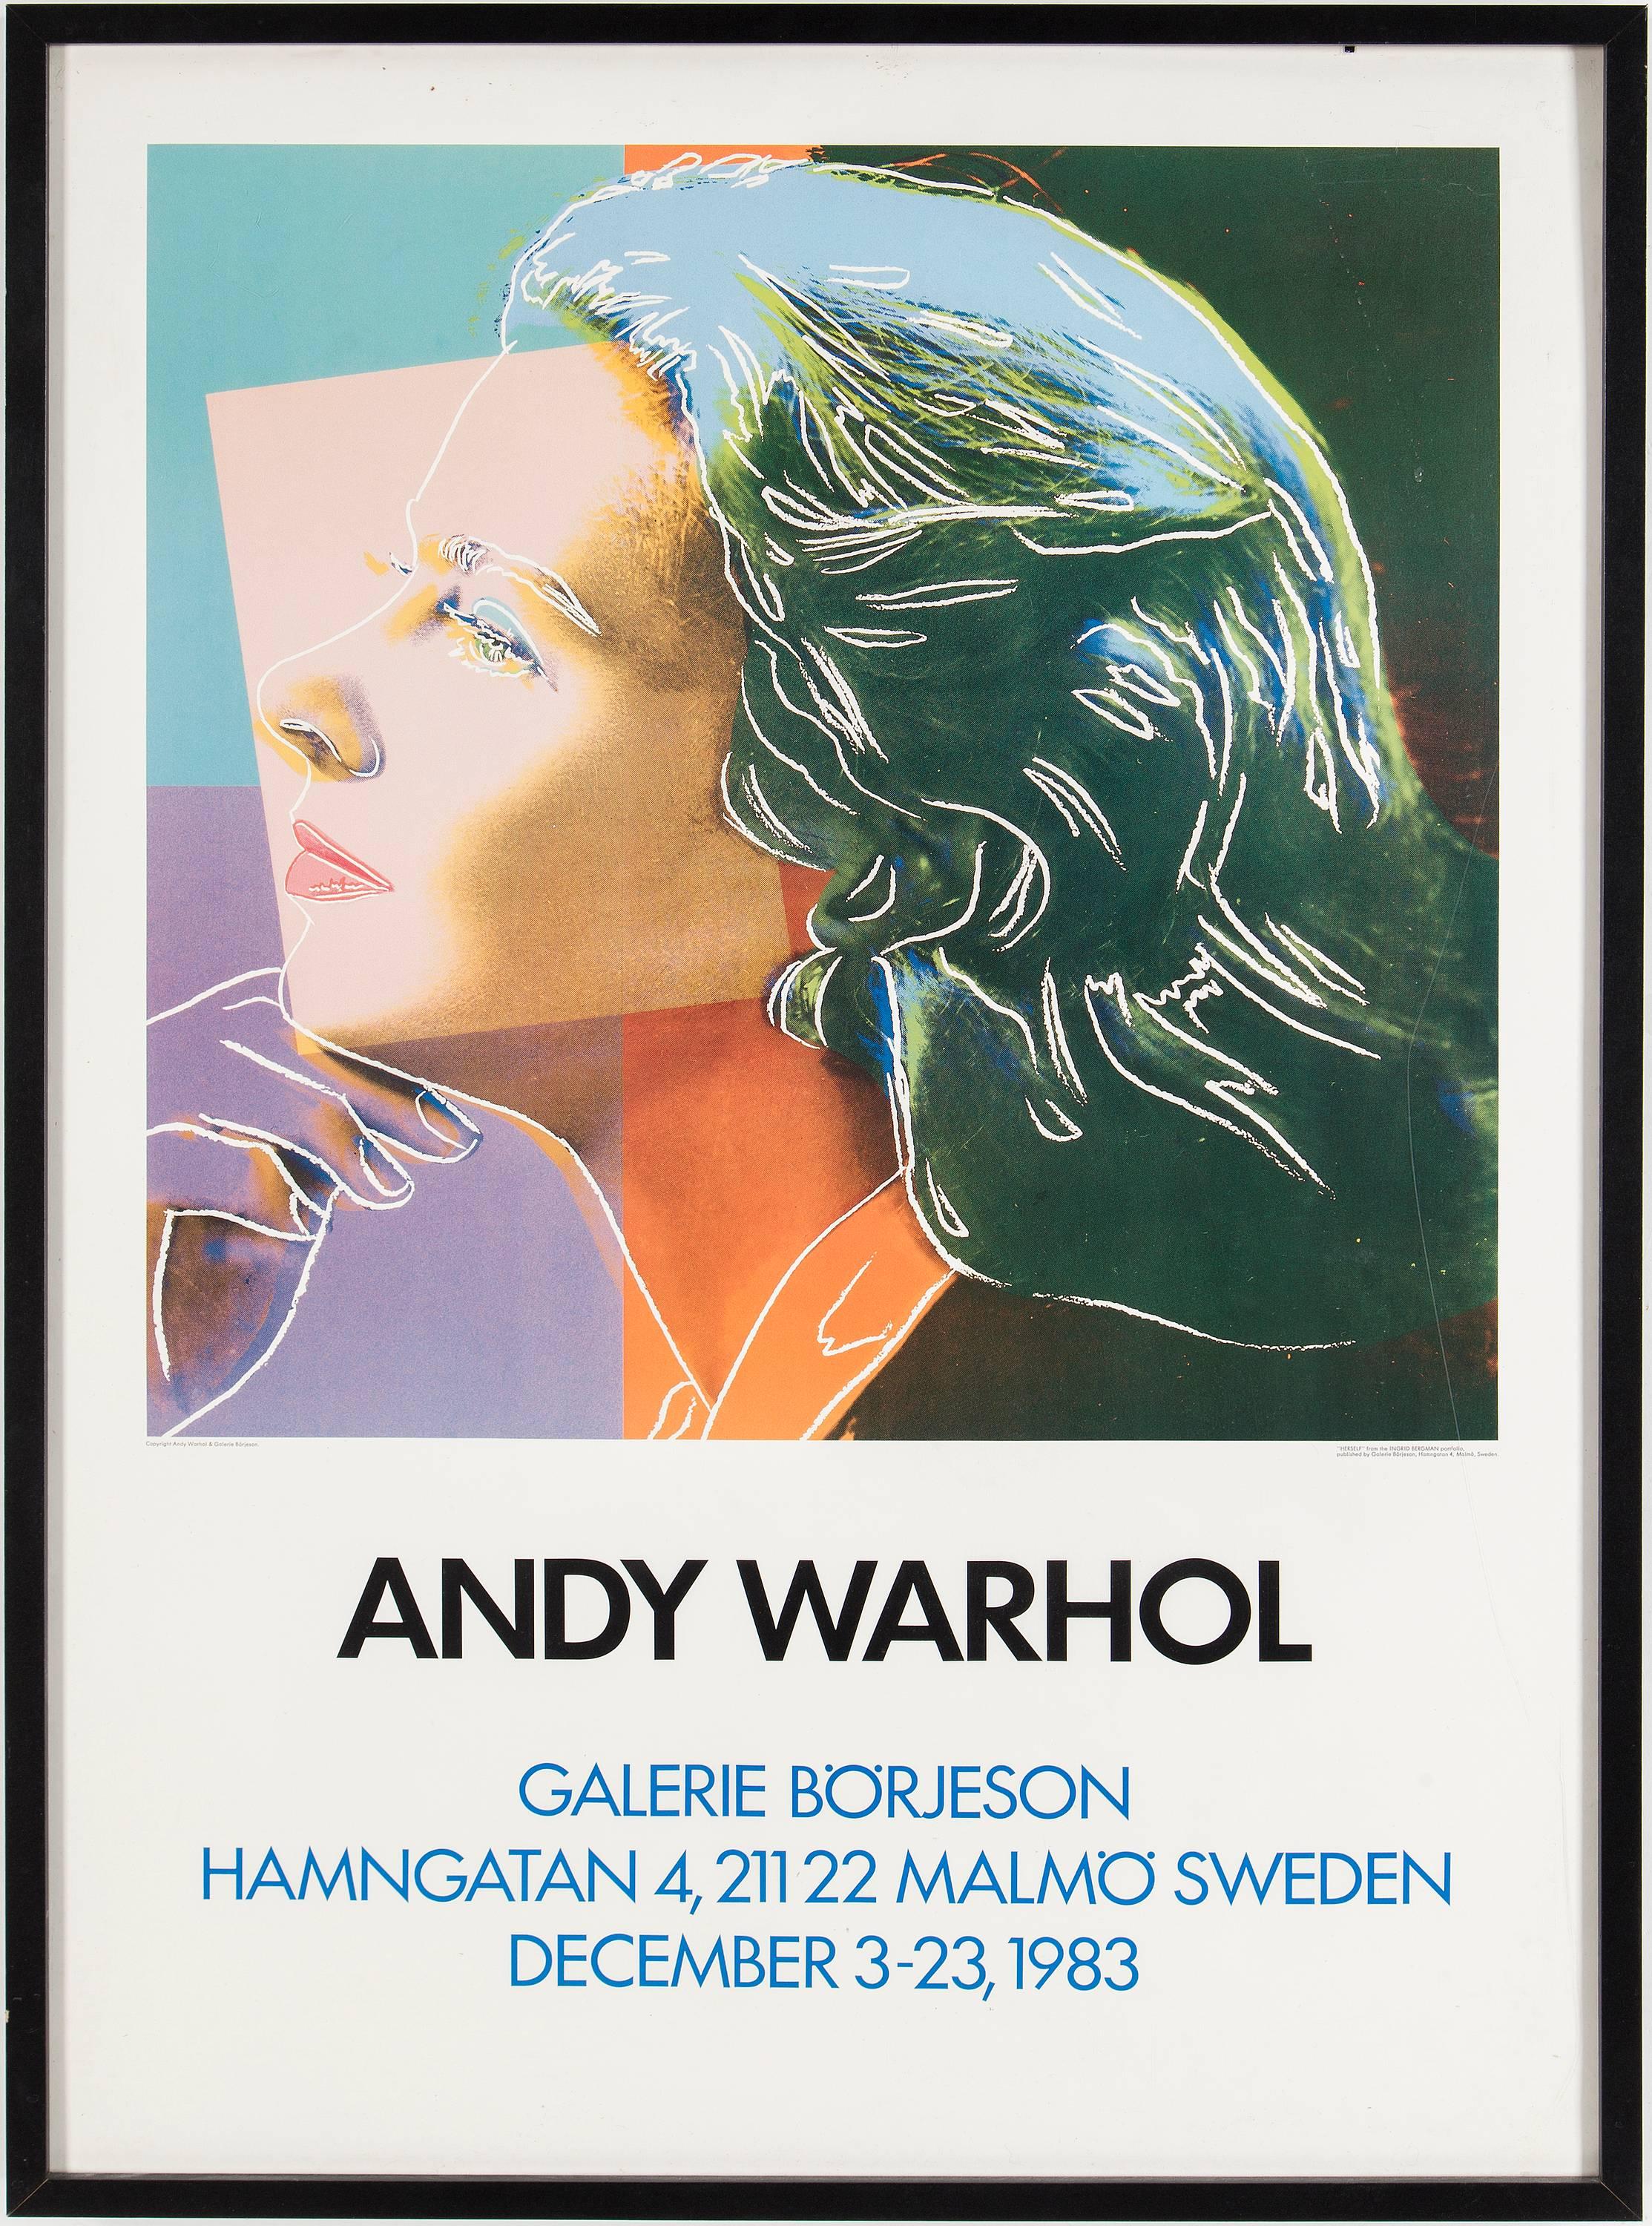 Two posters of Ingrid Bergman. Original vintage posters from Andy Warhol's exhibition in Galerie Borjeson in Malmo, Sweden in 1983. 

Offset lithograph printed on heavy edition stock paper. Posters are black framed with UV plexi.